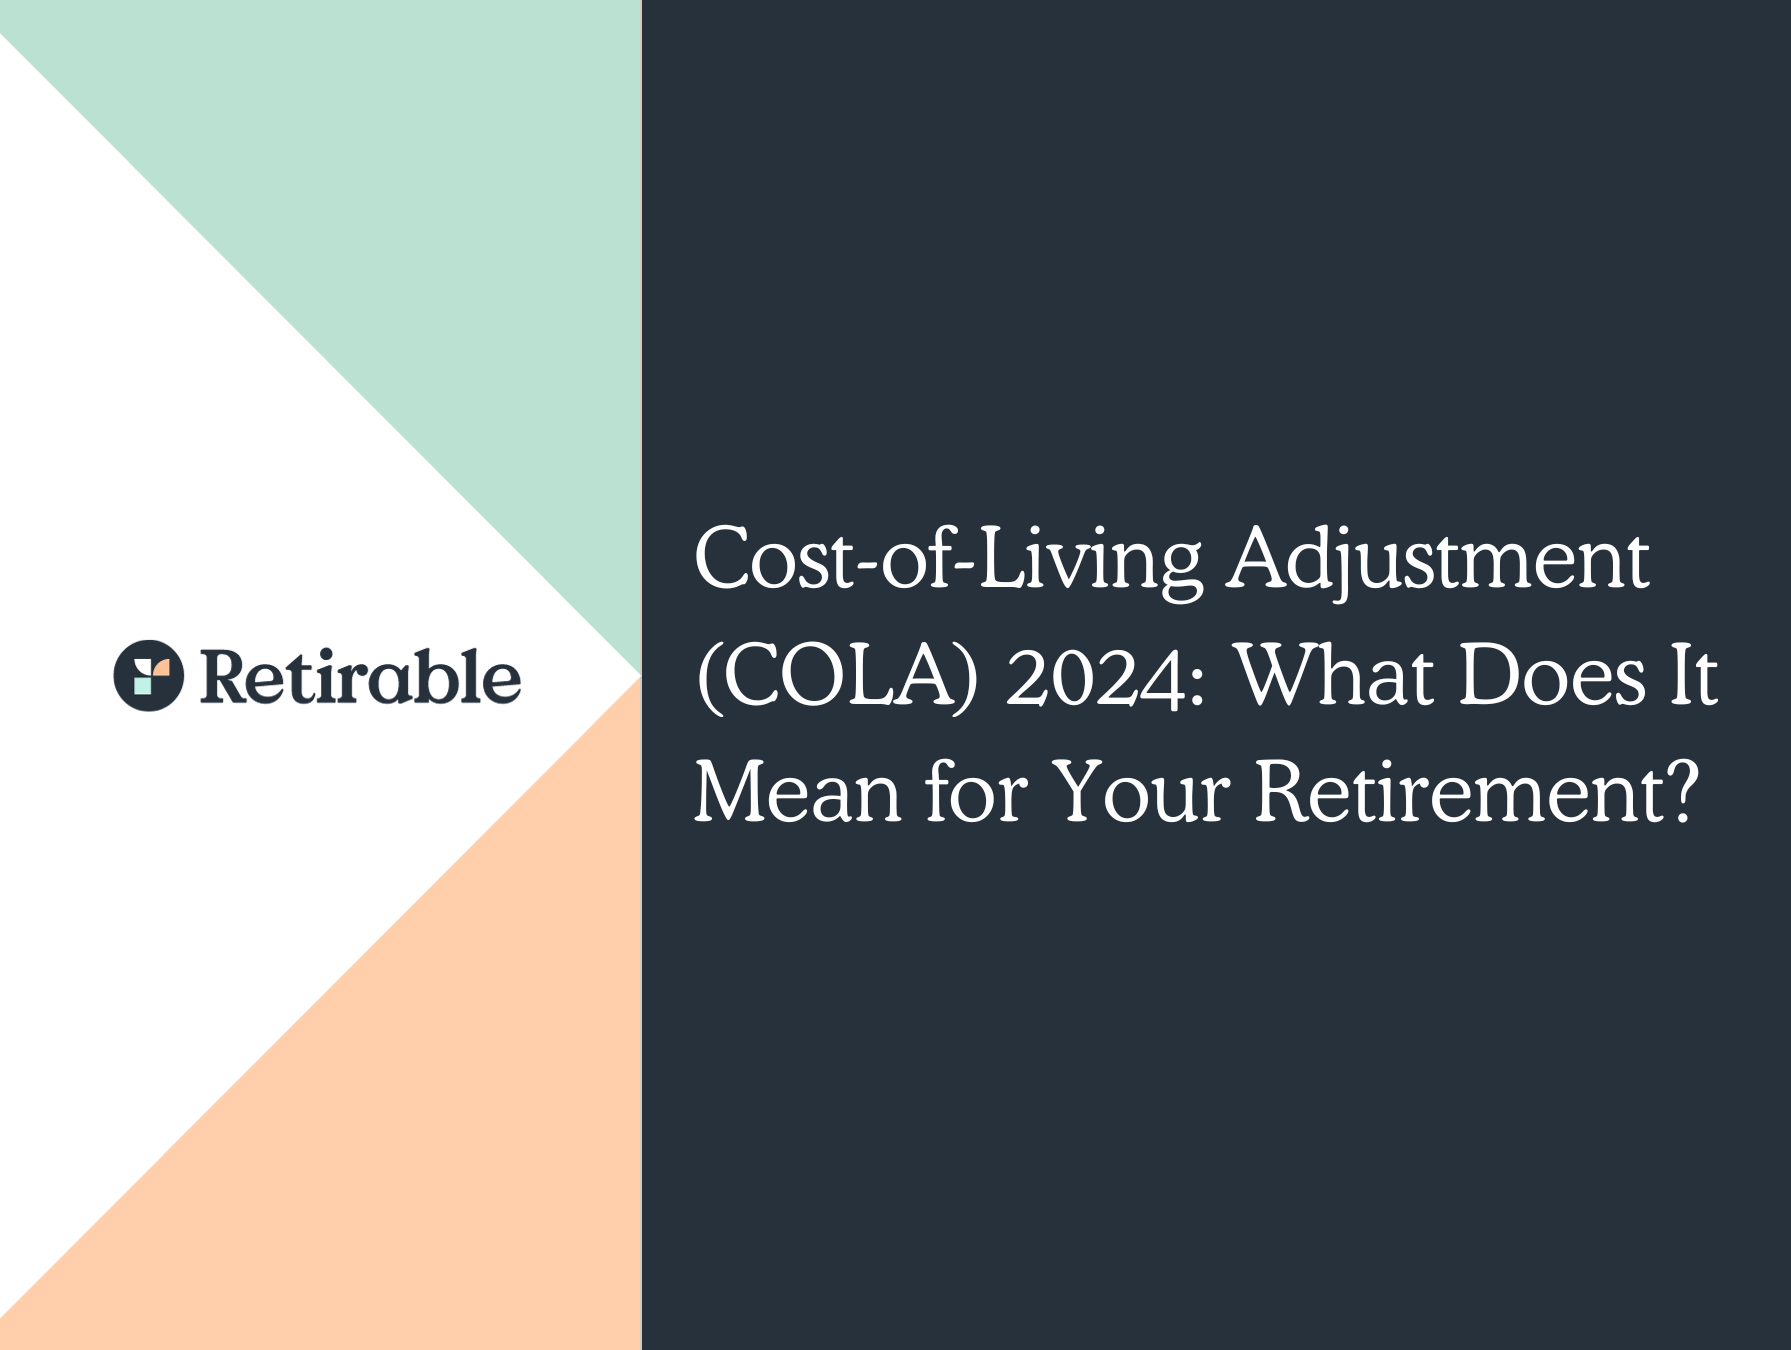 CostofLiving Adjustment (COLA) 2024 What Does It Mean For Your